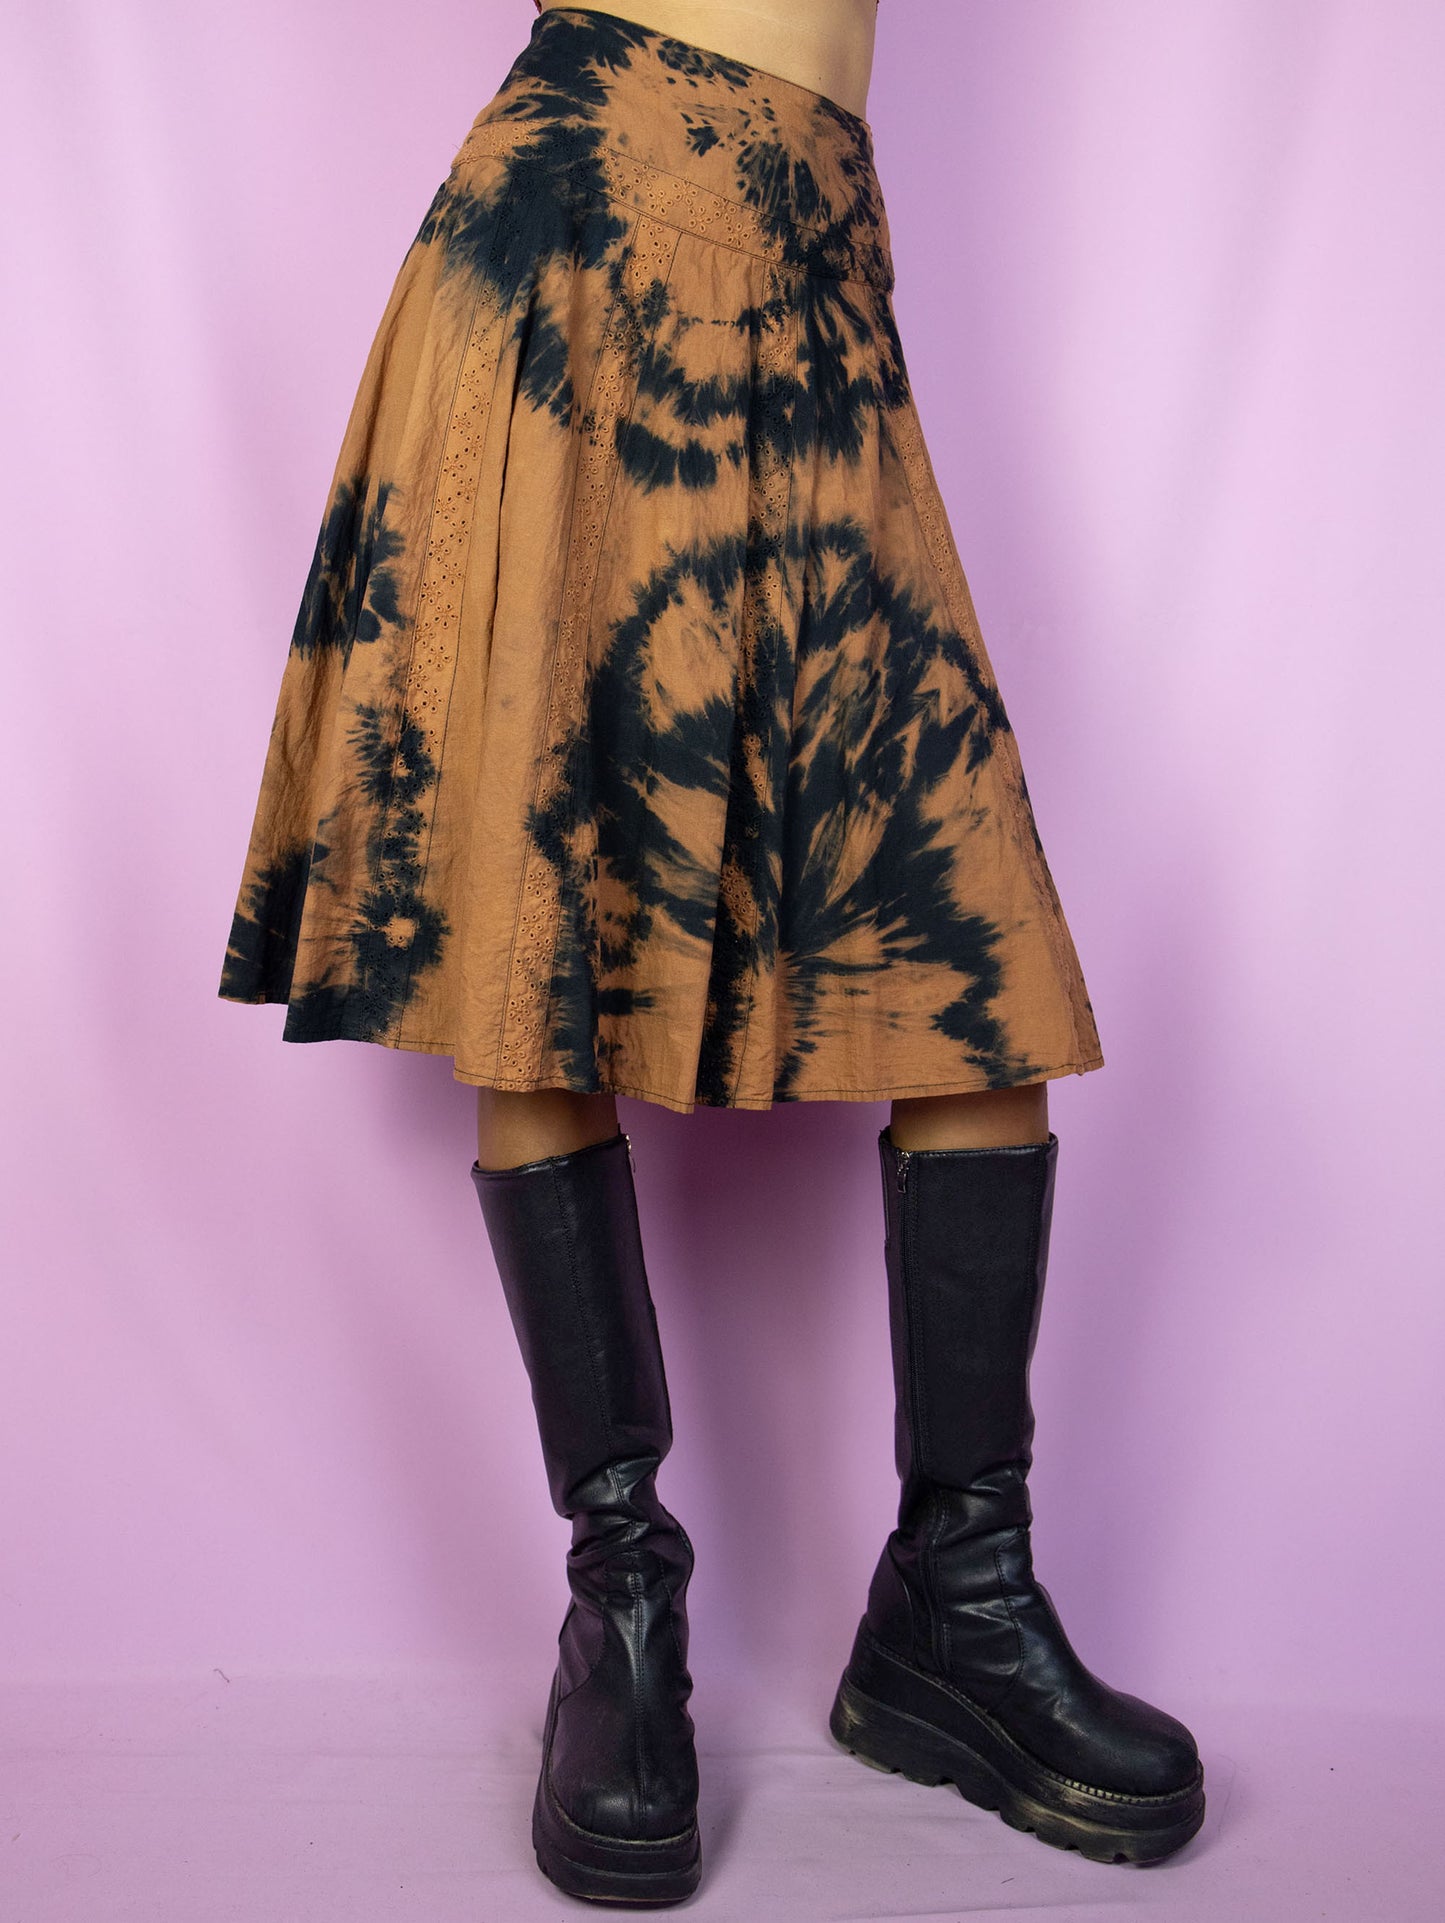 The Vintage 90s Tie Dye Midi Skirt is a brown and black bleached skirt with a side zipper closure. Boho summer festival 1990s psychedelic skirt.